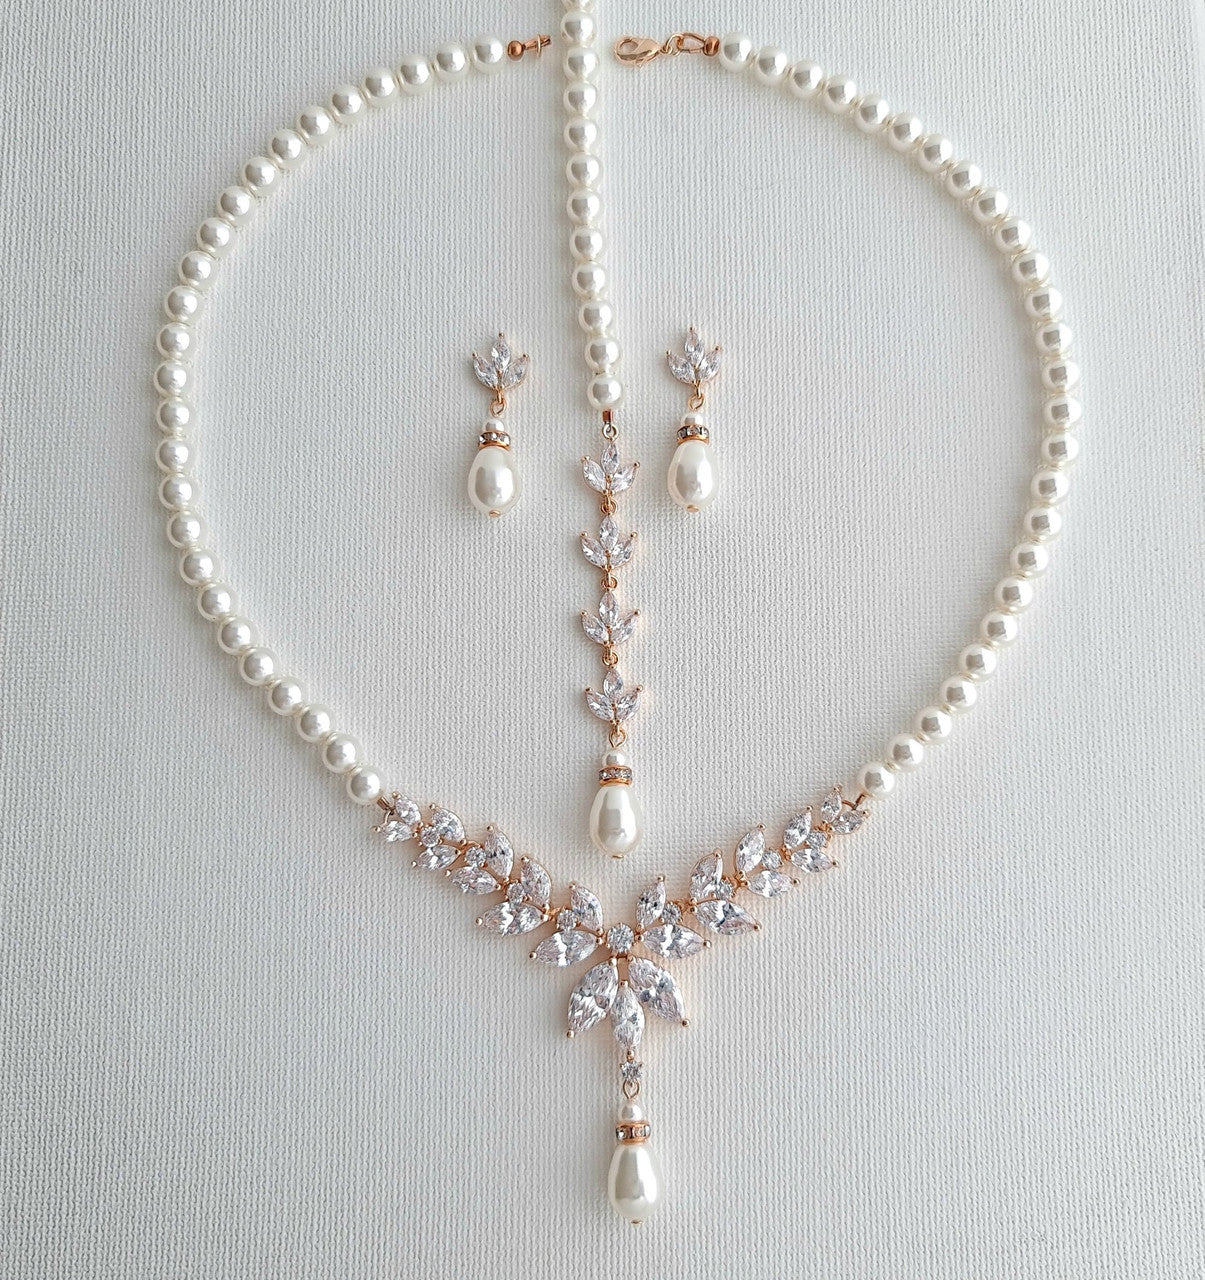 Pearl Necklace and Earrings Wedding Jewelry Set- Katie